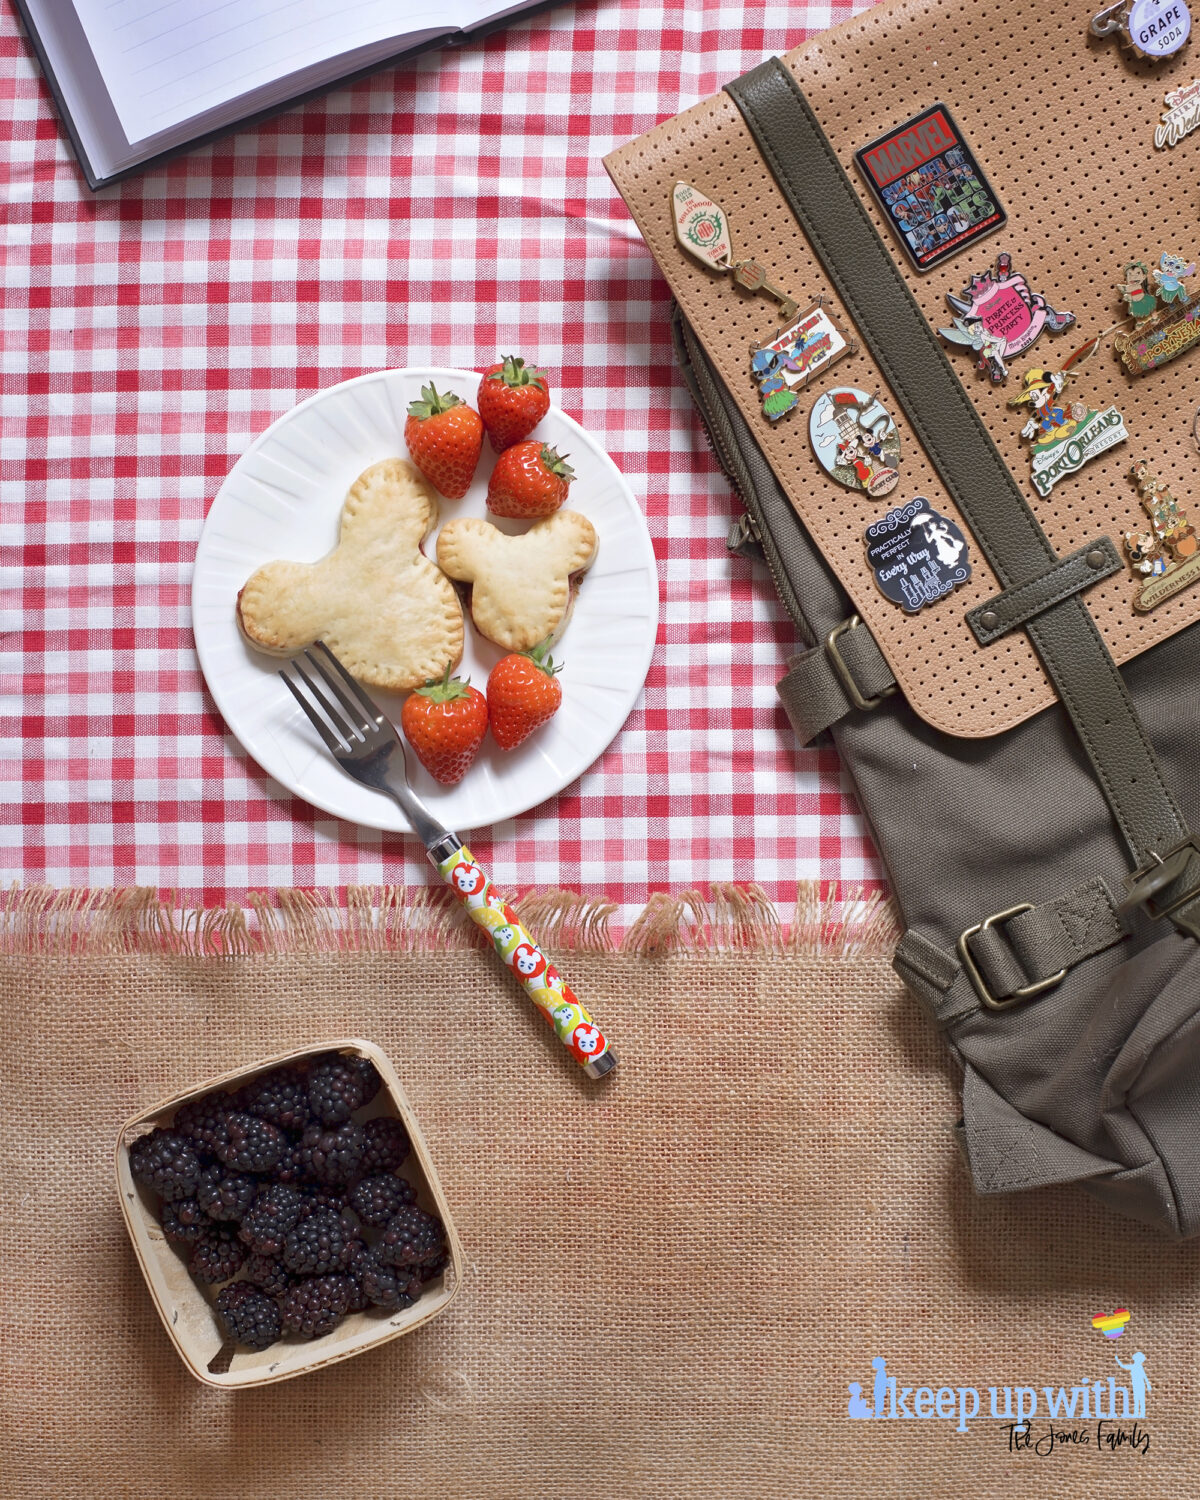 Image shows a flatlay of a red gingham checked tablecloth, overlaid with a jute burlap material with a fringe. On top is a ShopDisneyUK rucksack with many Disney pins from Disney's fairytale weddings, Port Orleans, Castaway Cay, Disneyland Hotel, Cinderellas Table and many more. Next to the bag is a white Vera Wang sideplate with two Mickey Mouse shaped shortcrust pies on. One is larger than the other. There is a ShopDisney fork balancing on the plate with a summer citrus and apples pattern on it.  There is a wooden punnet of blackberries below the plate.The image is watermarked by Keep up with the Jones Family.  